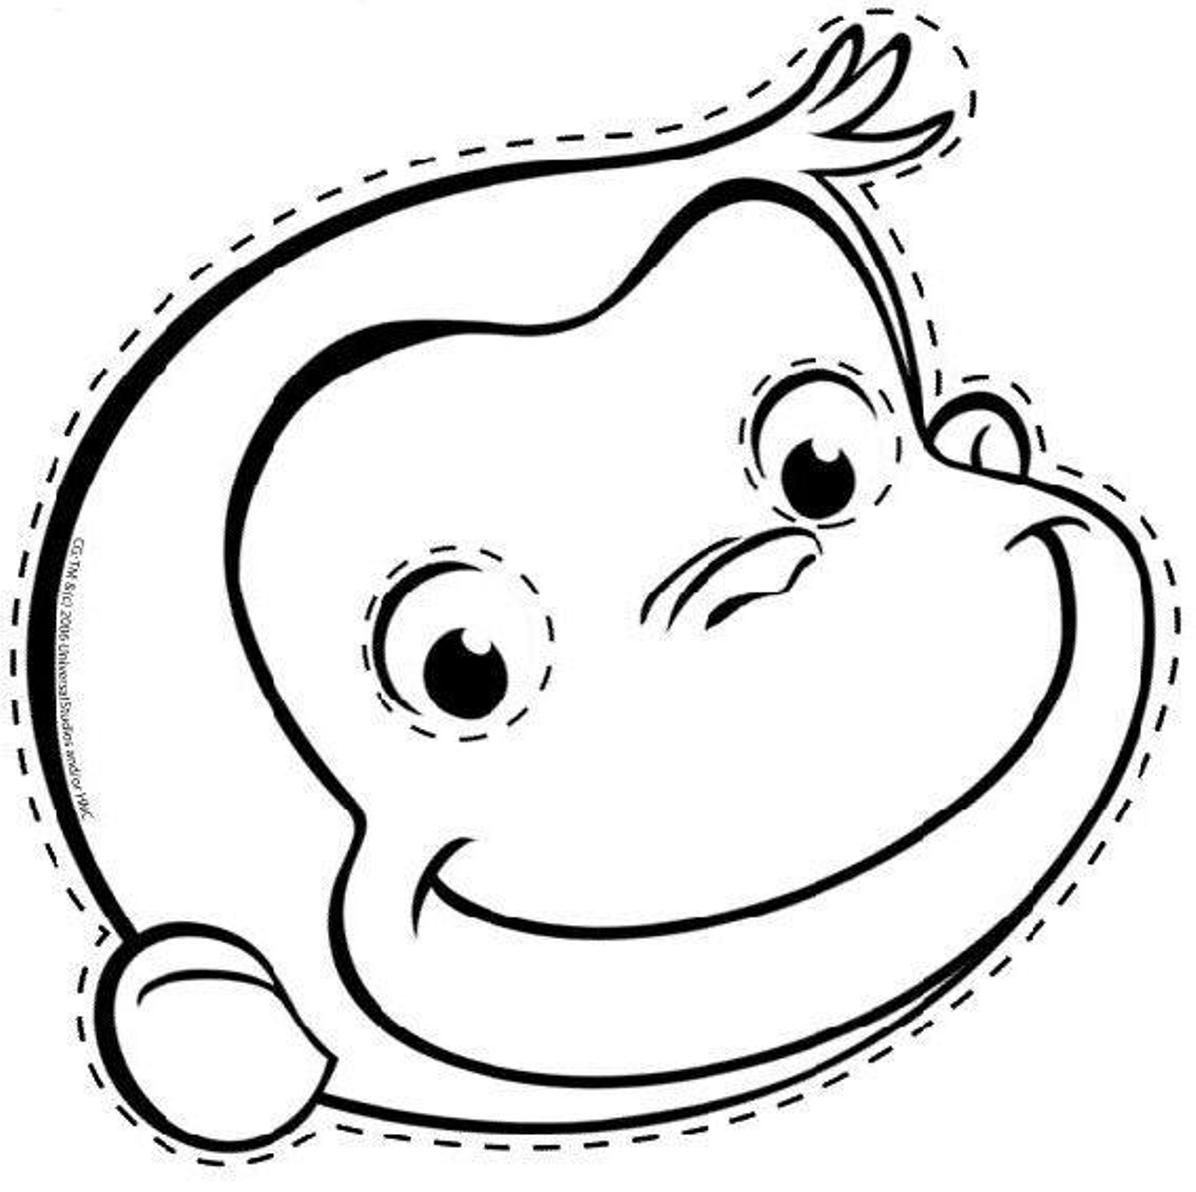 curious george coloring pages id 91055 : Uncategorized - yoand.